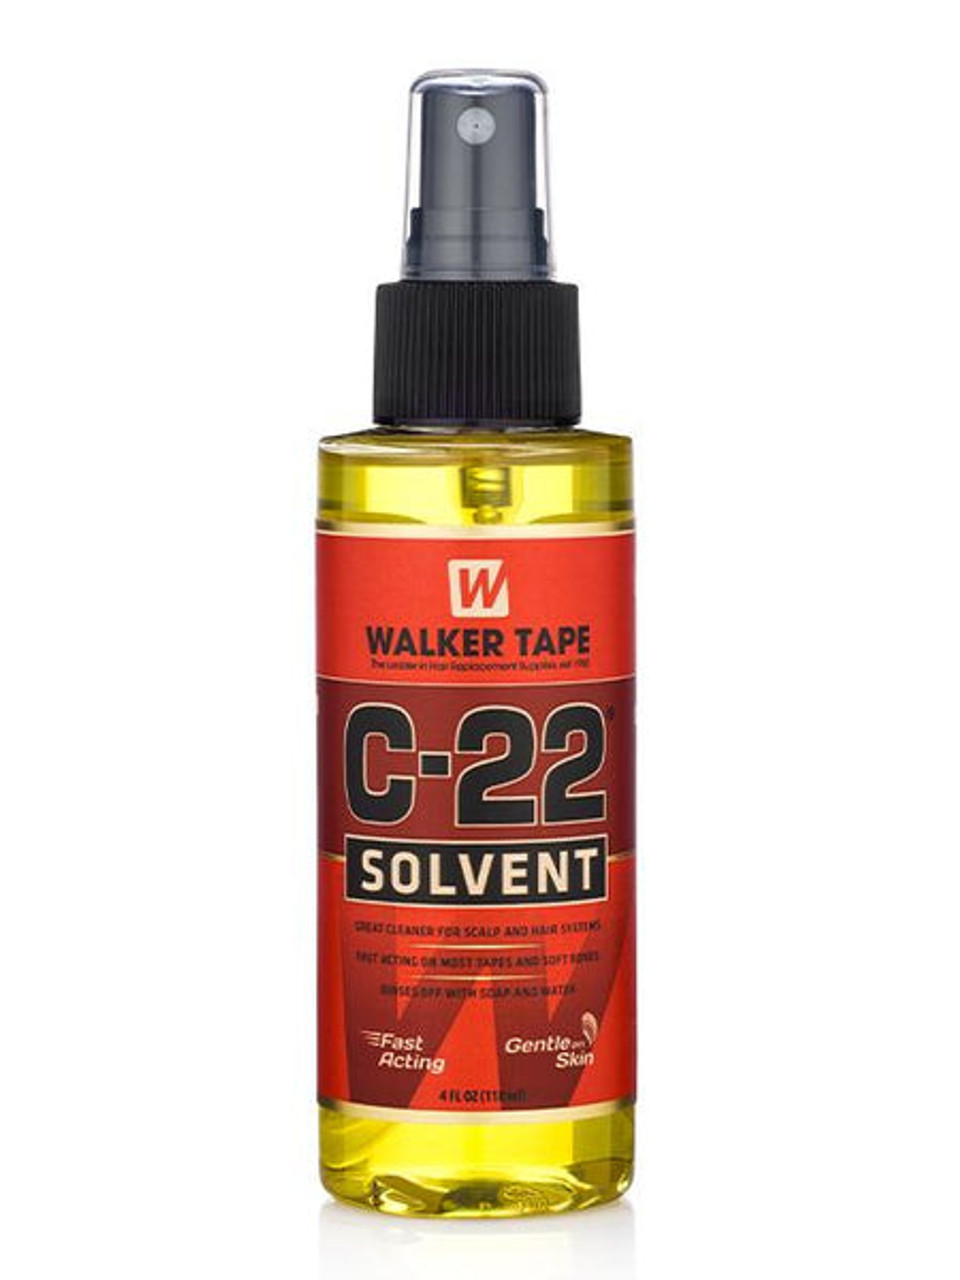 C-22 Lace Adhesive Remover Spray for Hair Extension Walker Tape